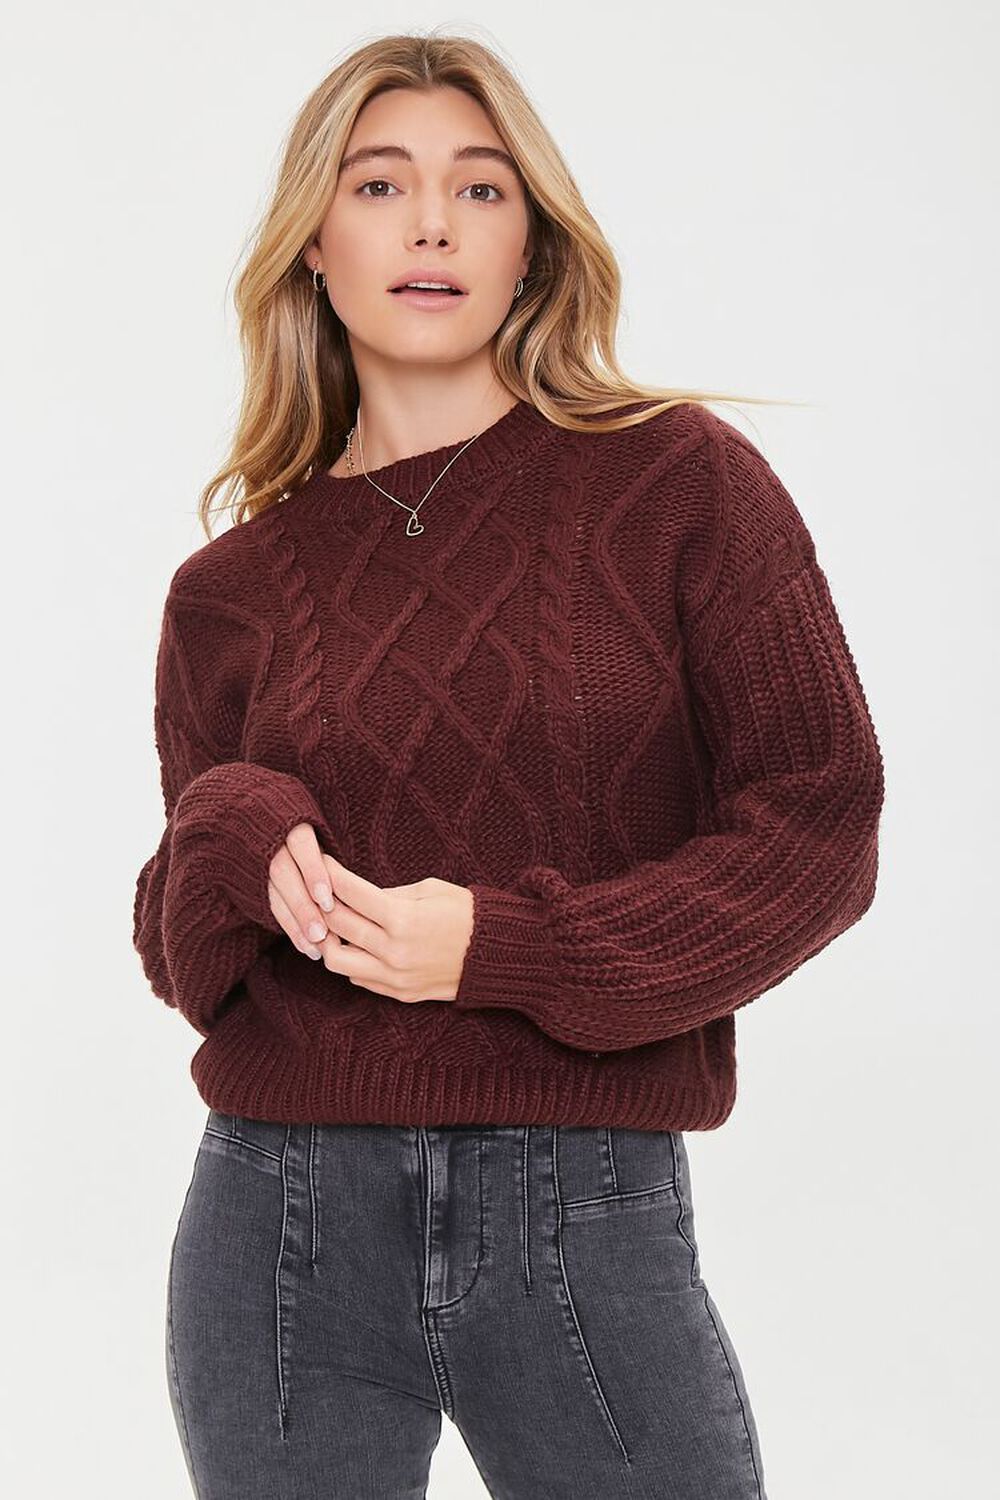 BURGUNDY Cable Knit Drop-Sleeve Sweater, image 1